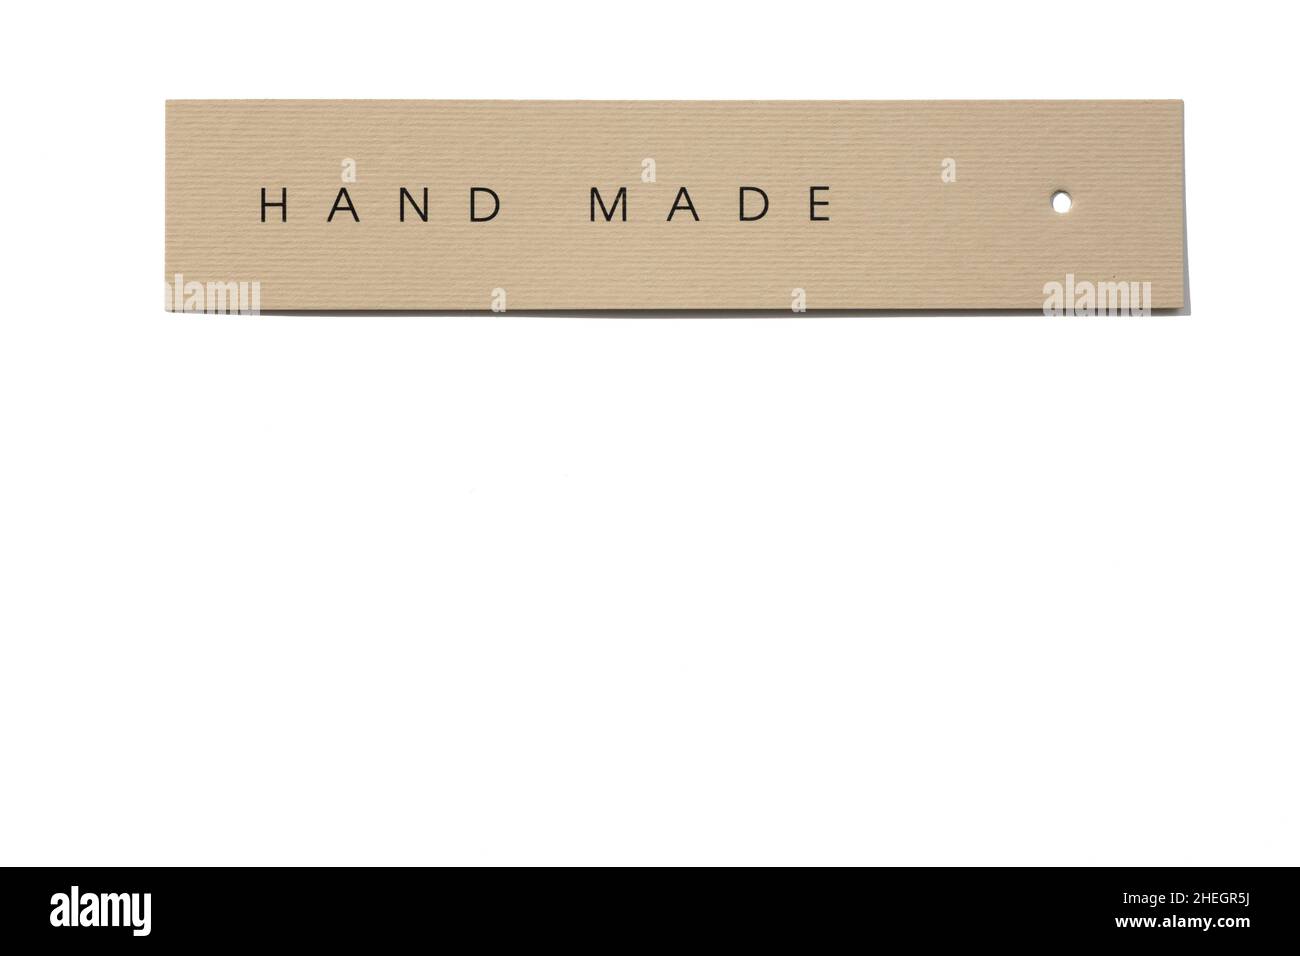 Clothes tag of rectangle shape positioned horizontally on white background with small hole in right side with inscription on it indicating that Stock Photo